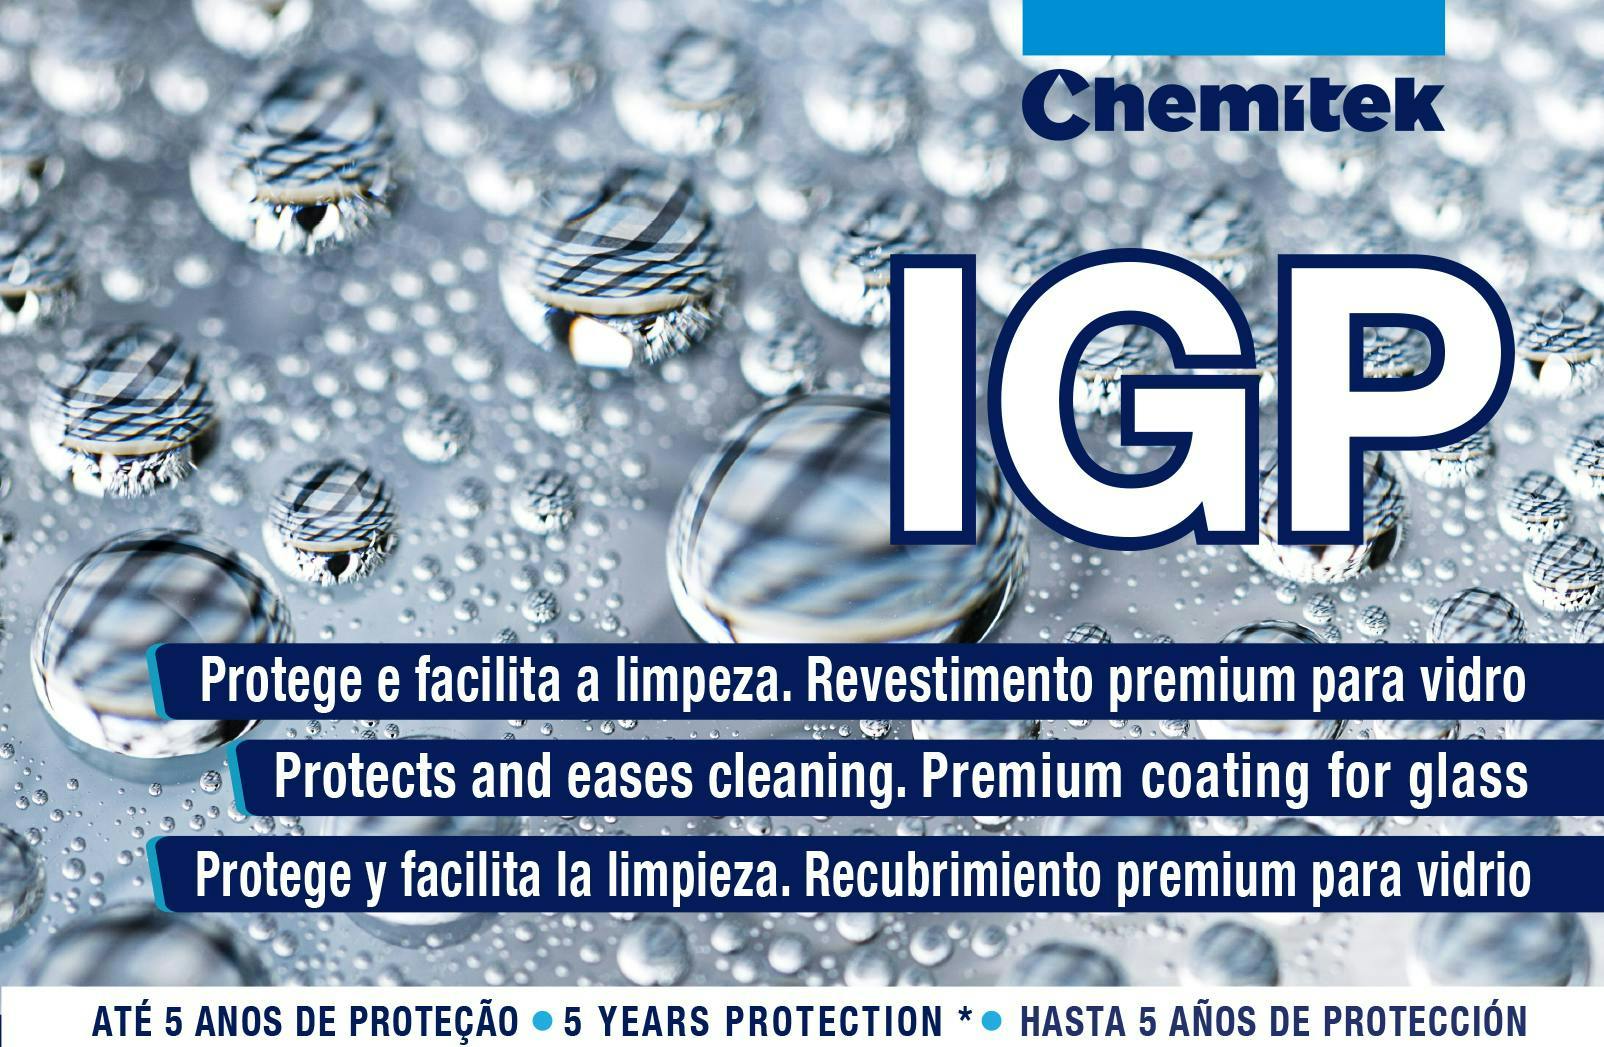 Industrial Glass Protect